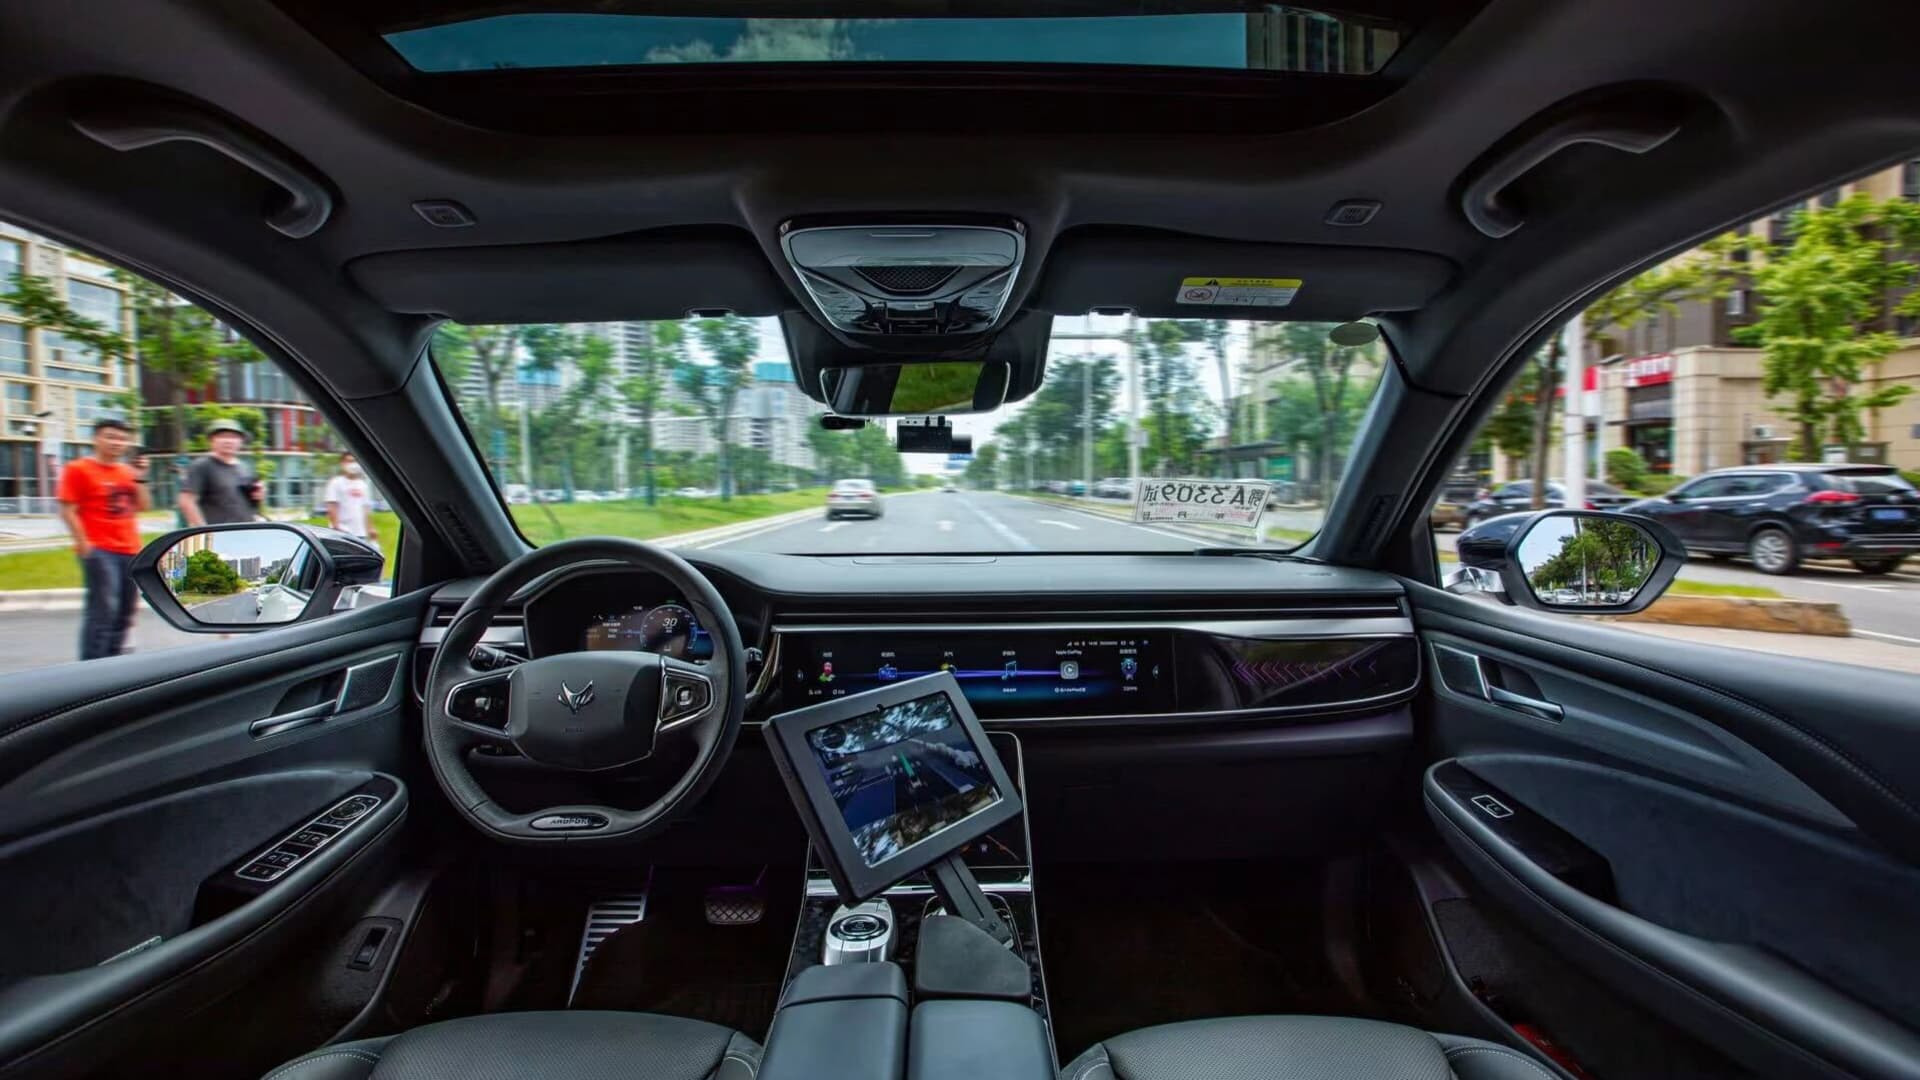 China’s money town is allowing the general public consider completely driverless robotaxis — and has more substantial rollout plans, startup Pony.ai says